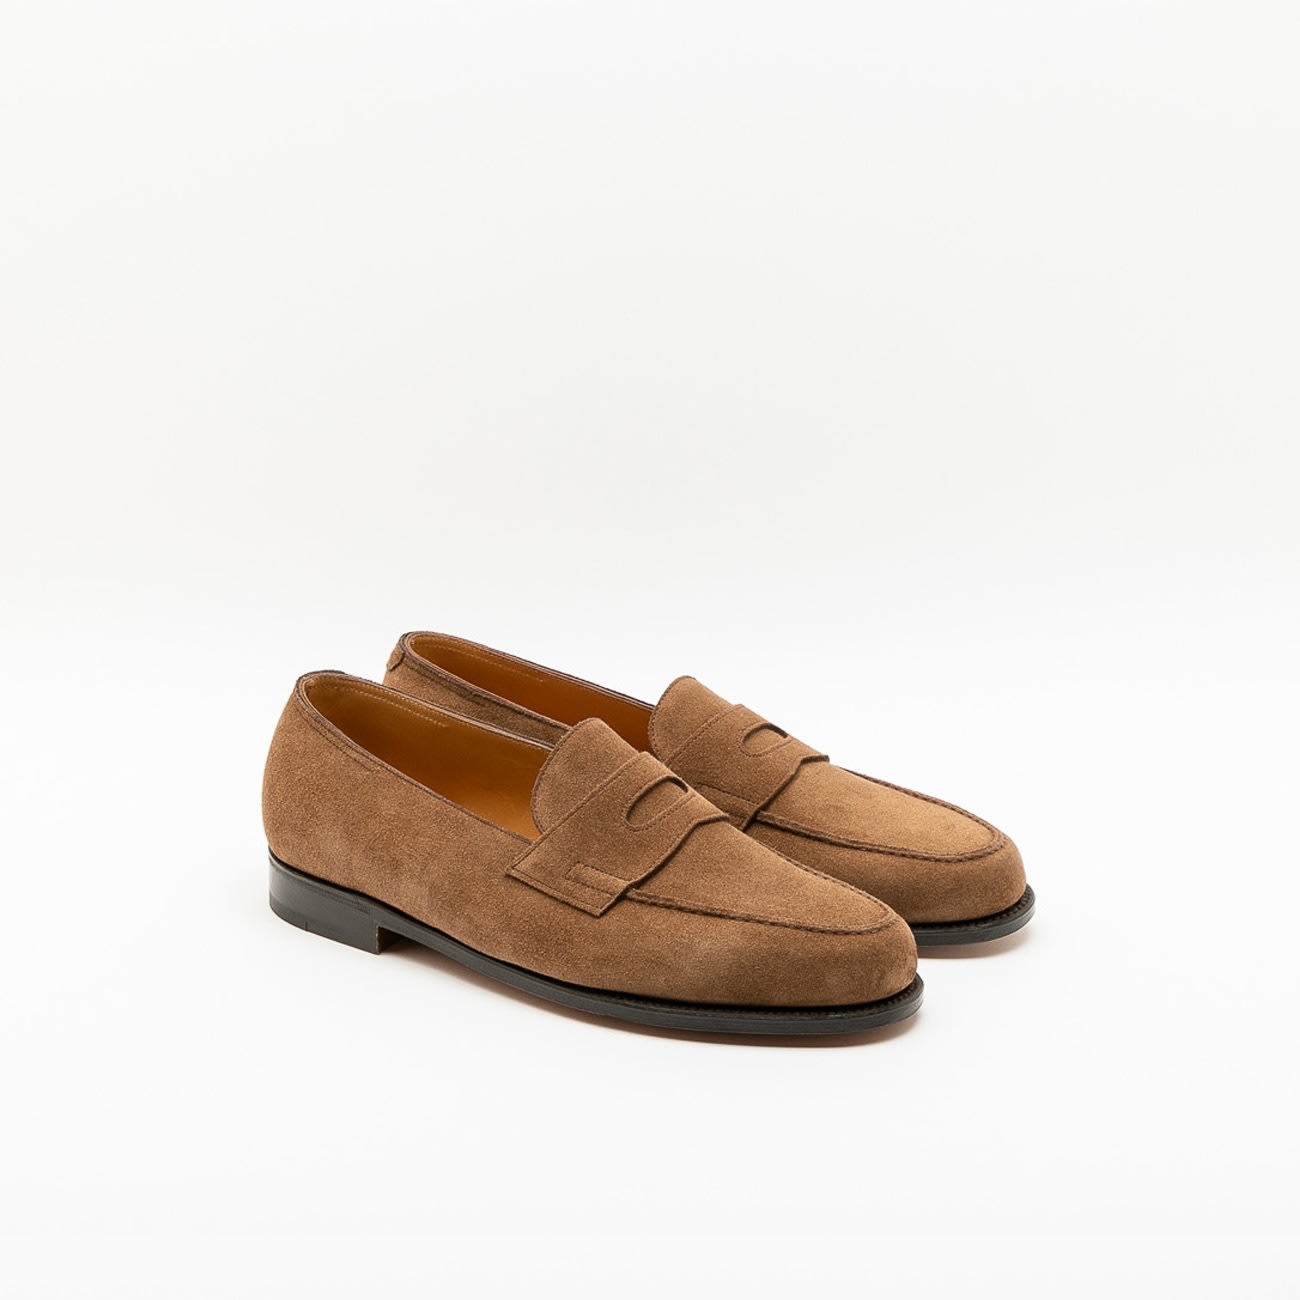 John Lobb Lopez Saddle Suede Unlined Penny Loafer In Tan | ModeSens